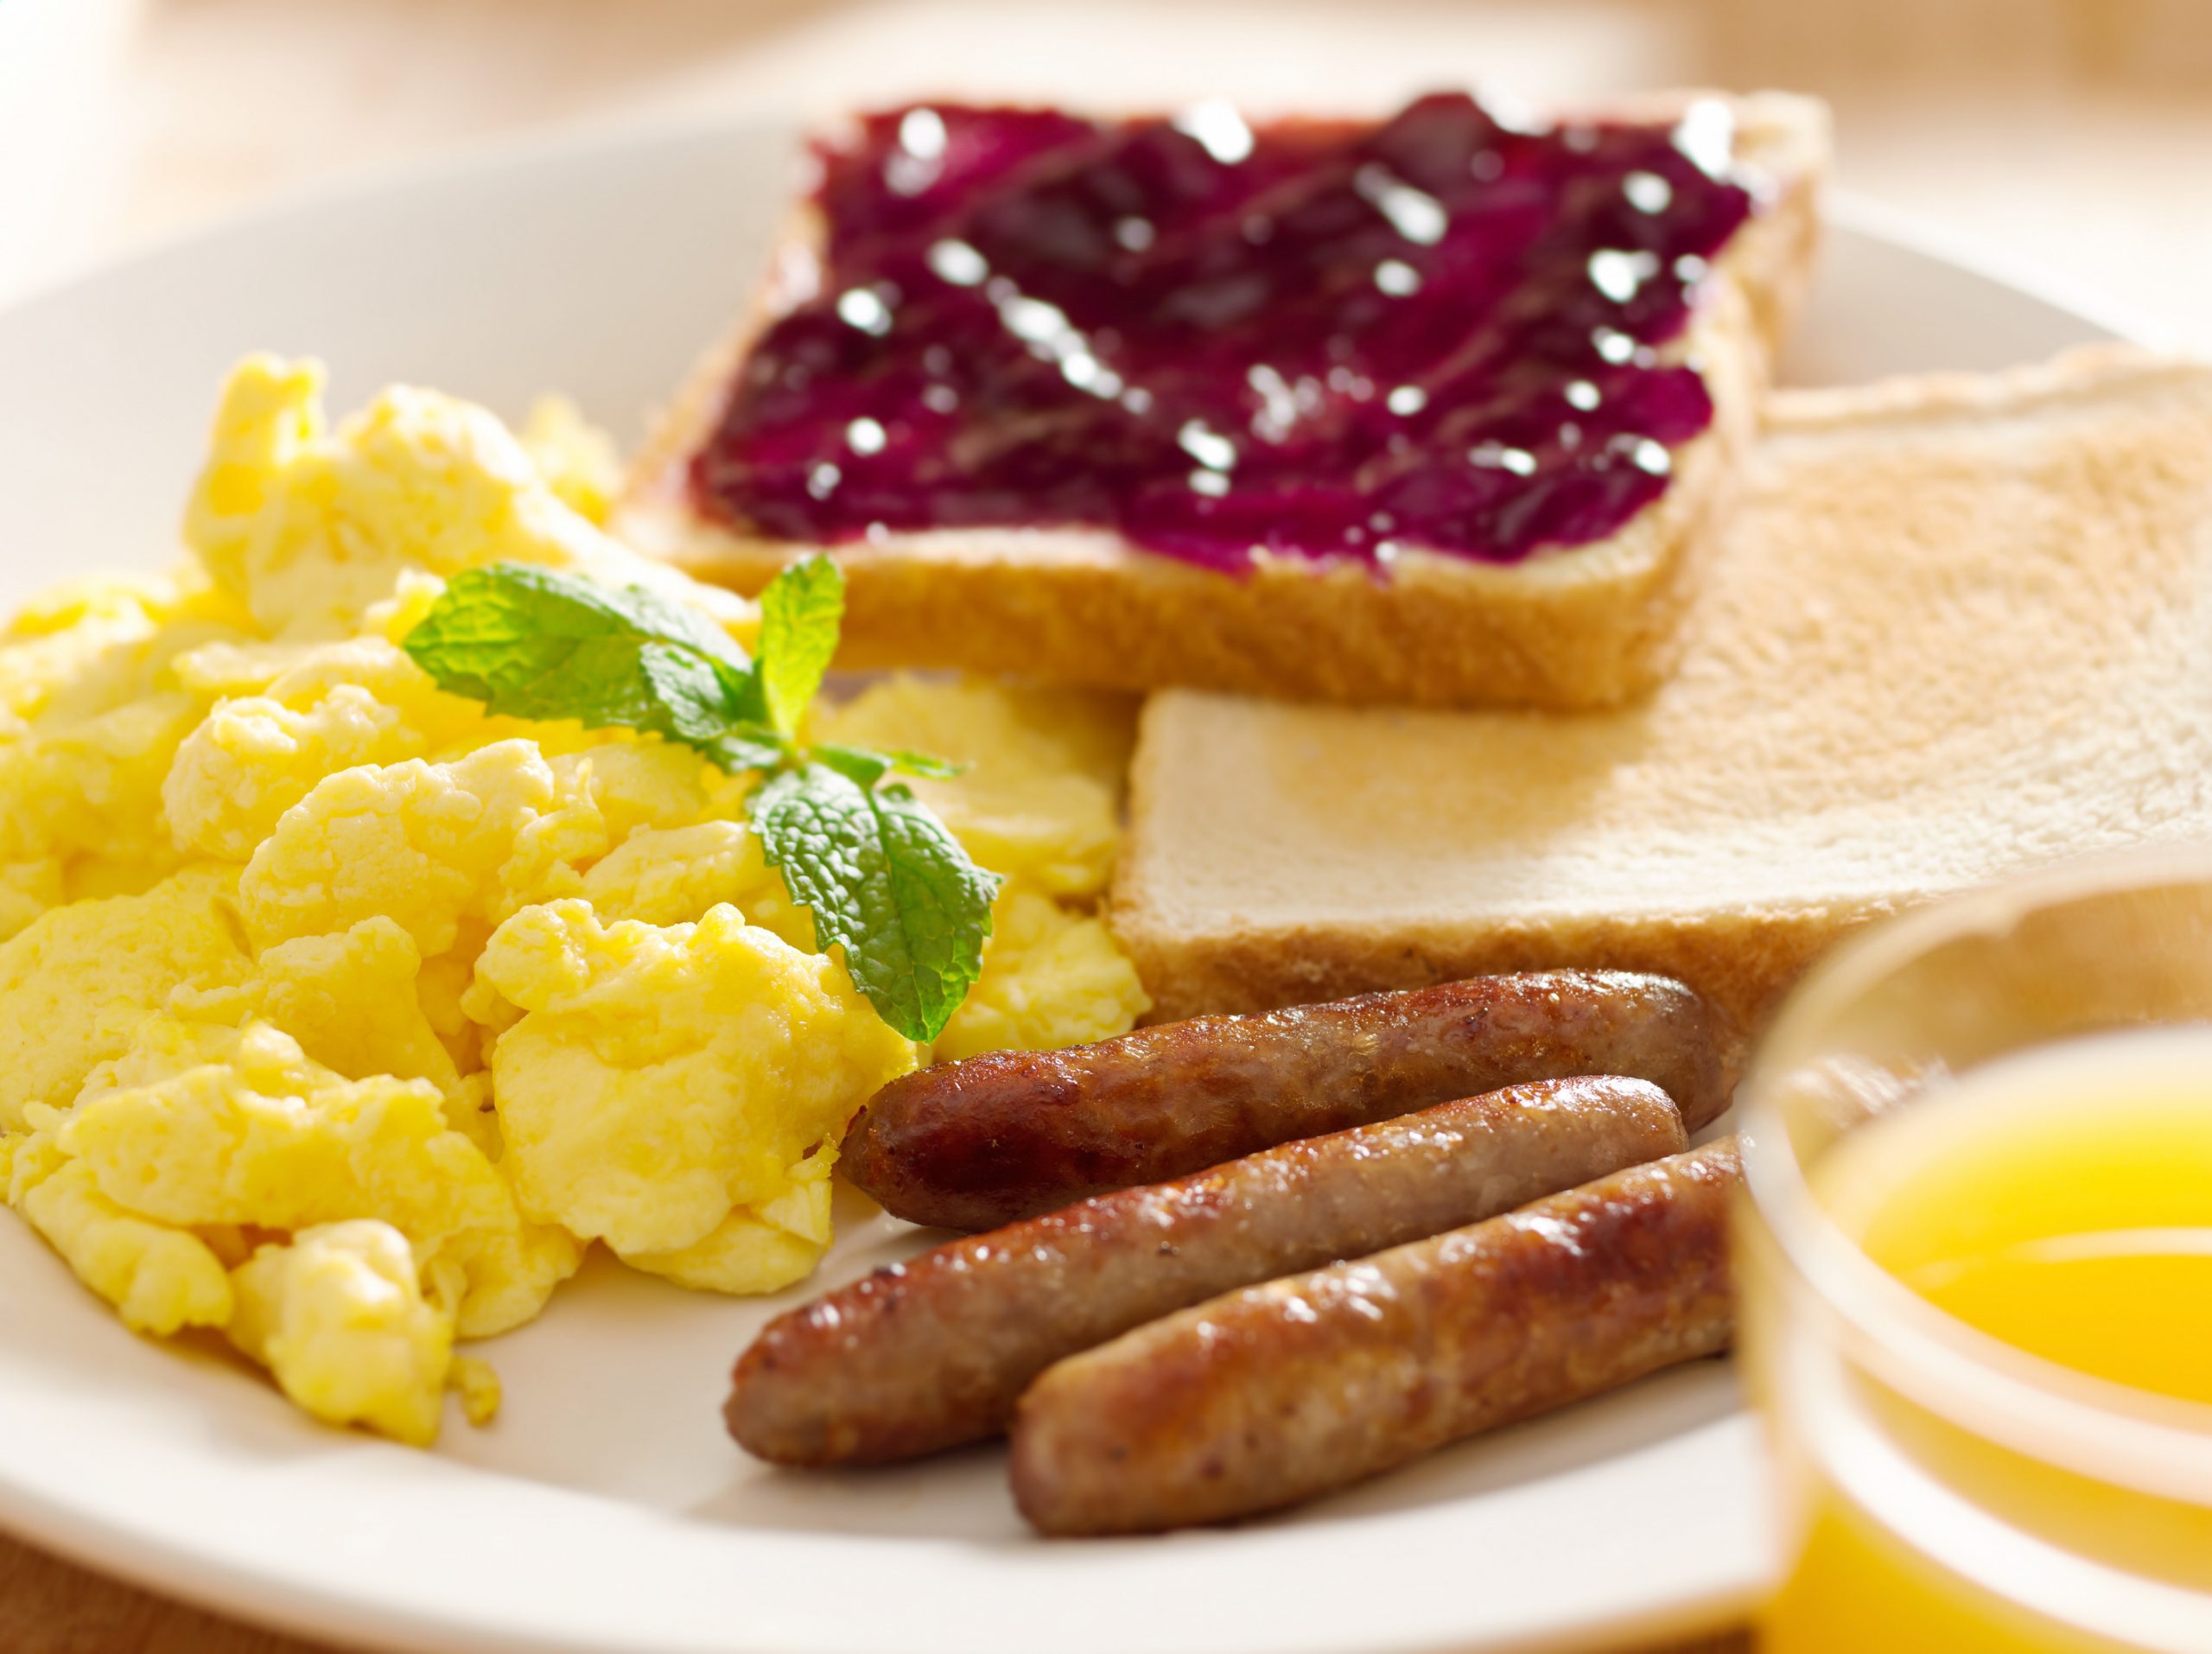 breakfast food - american style breakfast with scrambled eggs, sausage and toast.